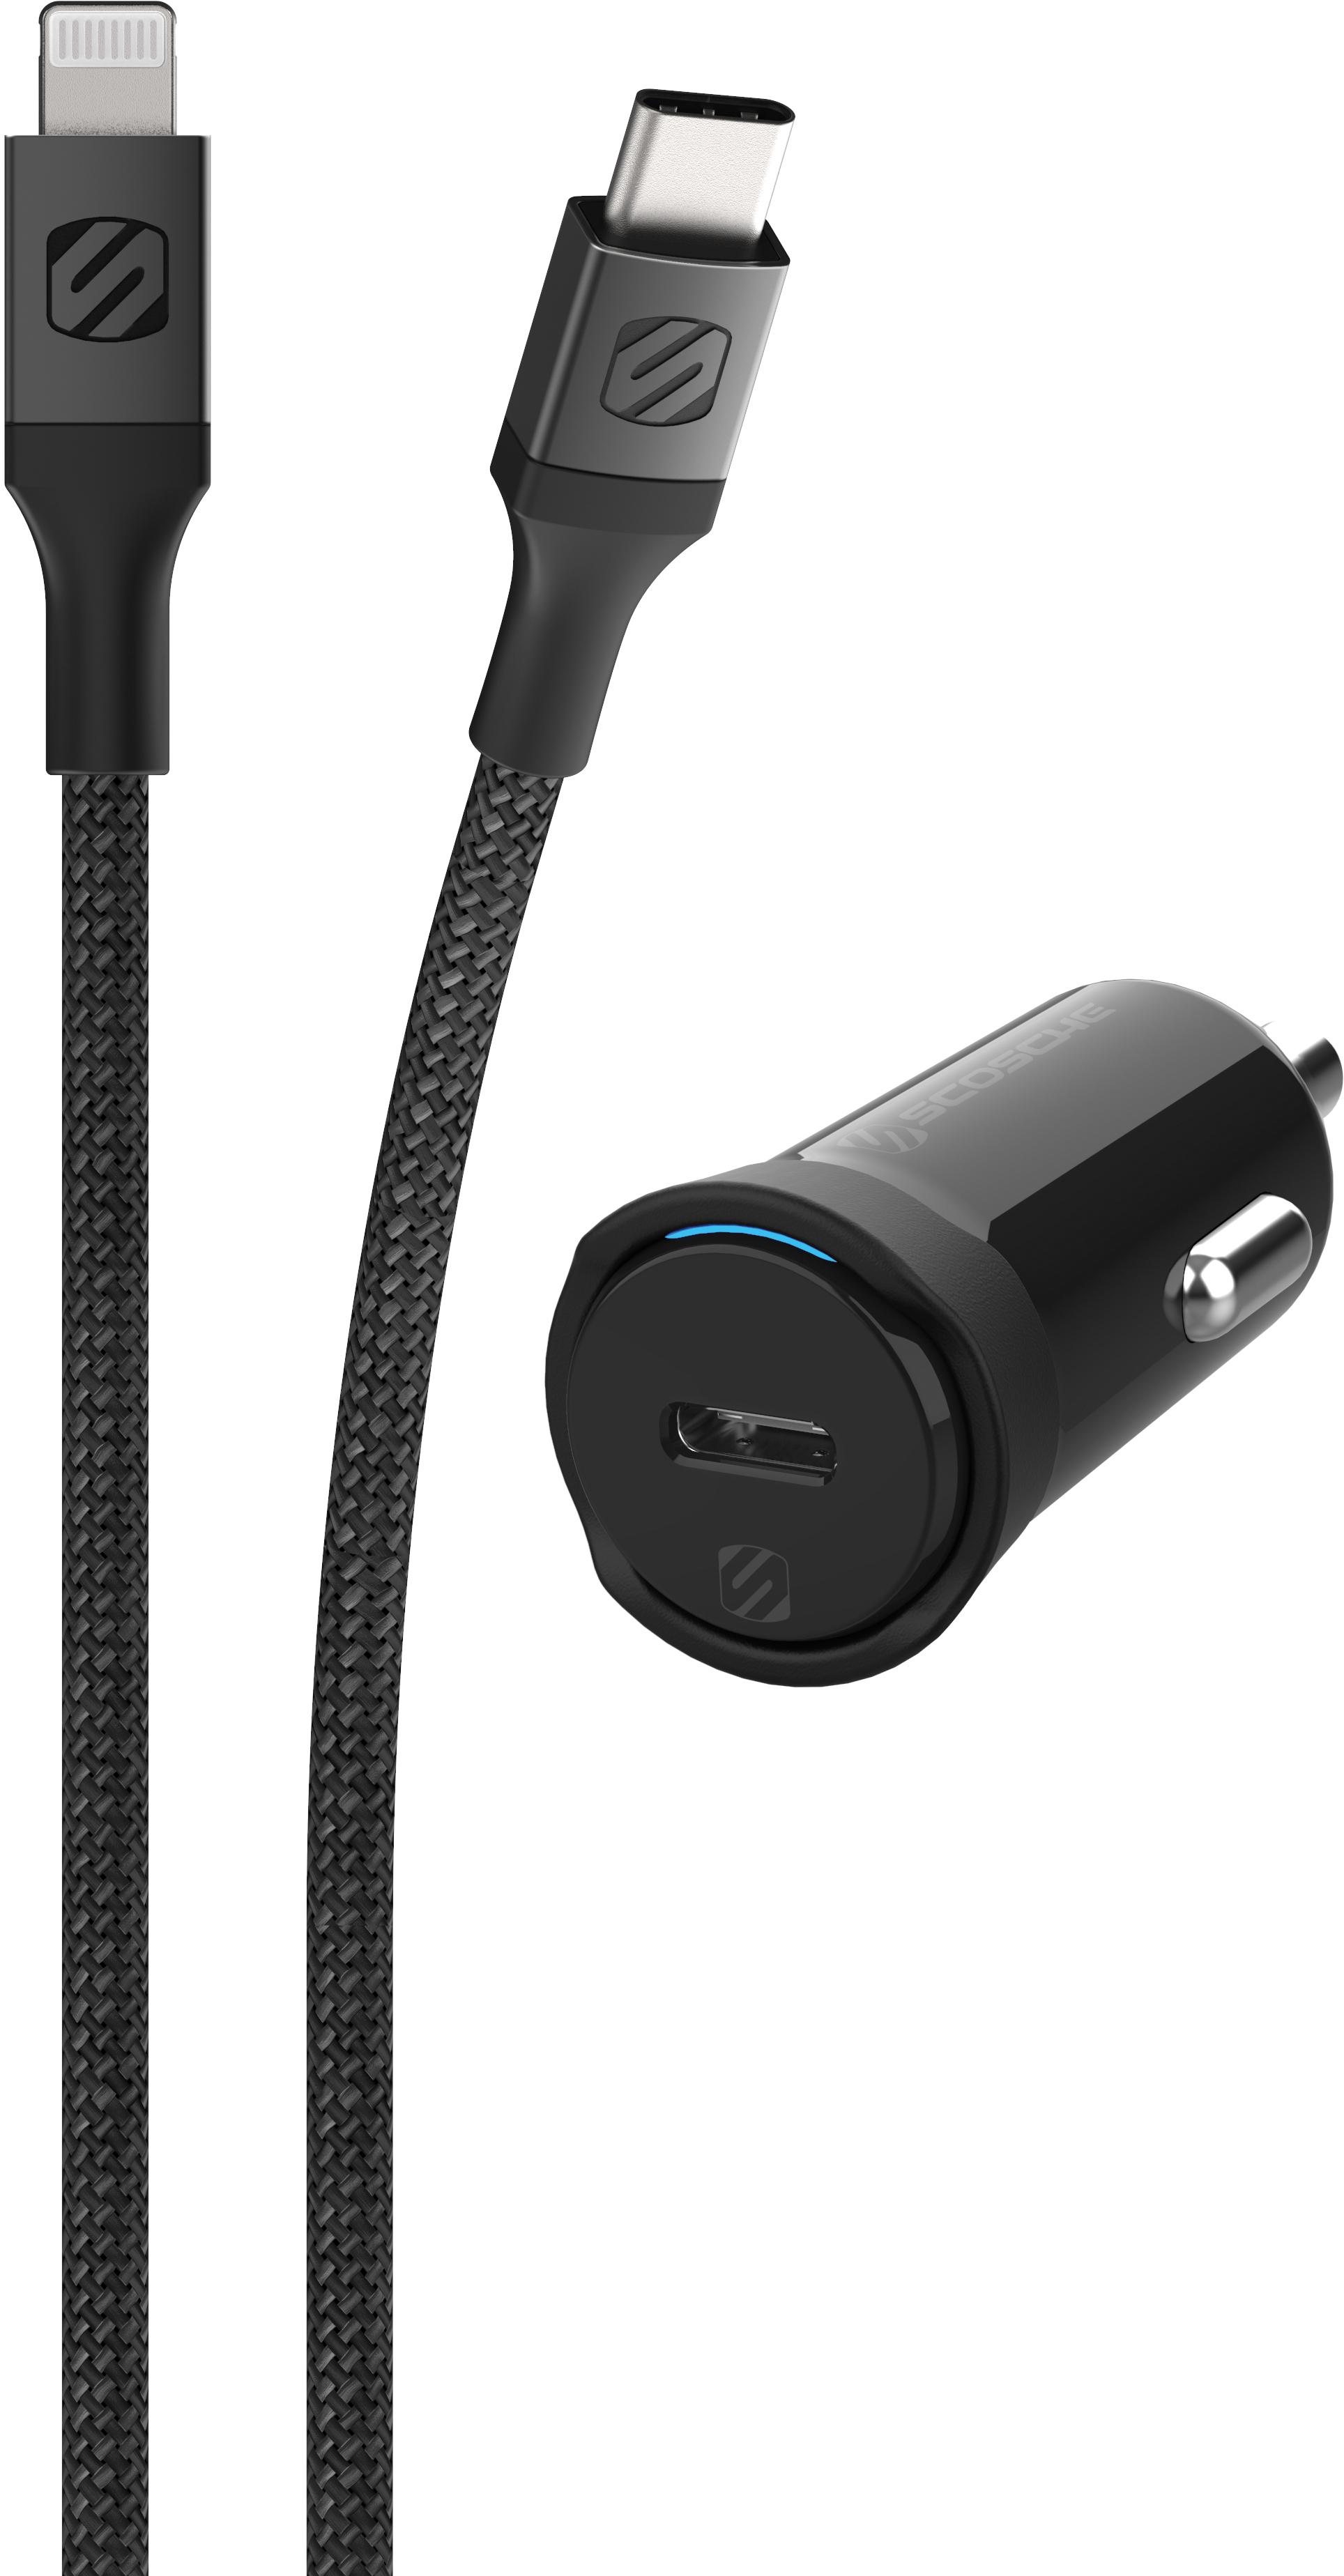 Scosche Powervolt Usb-C Car Charger With Captive 0.9M Lightning Cable